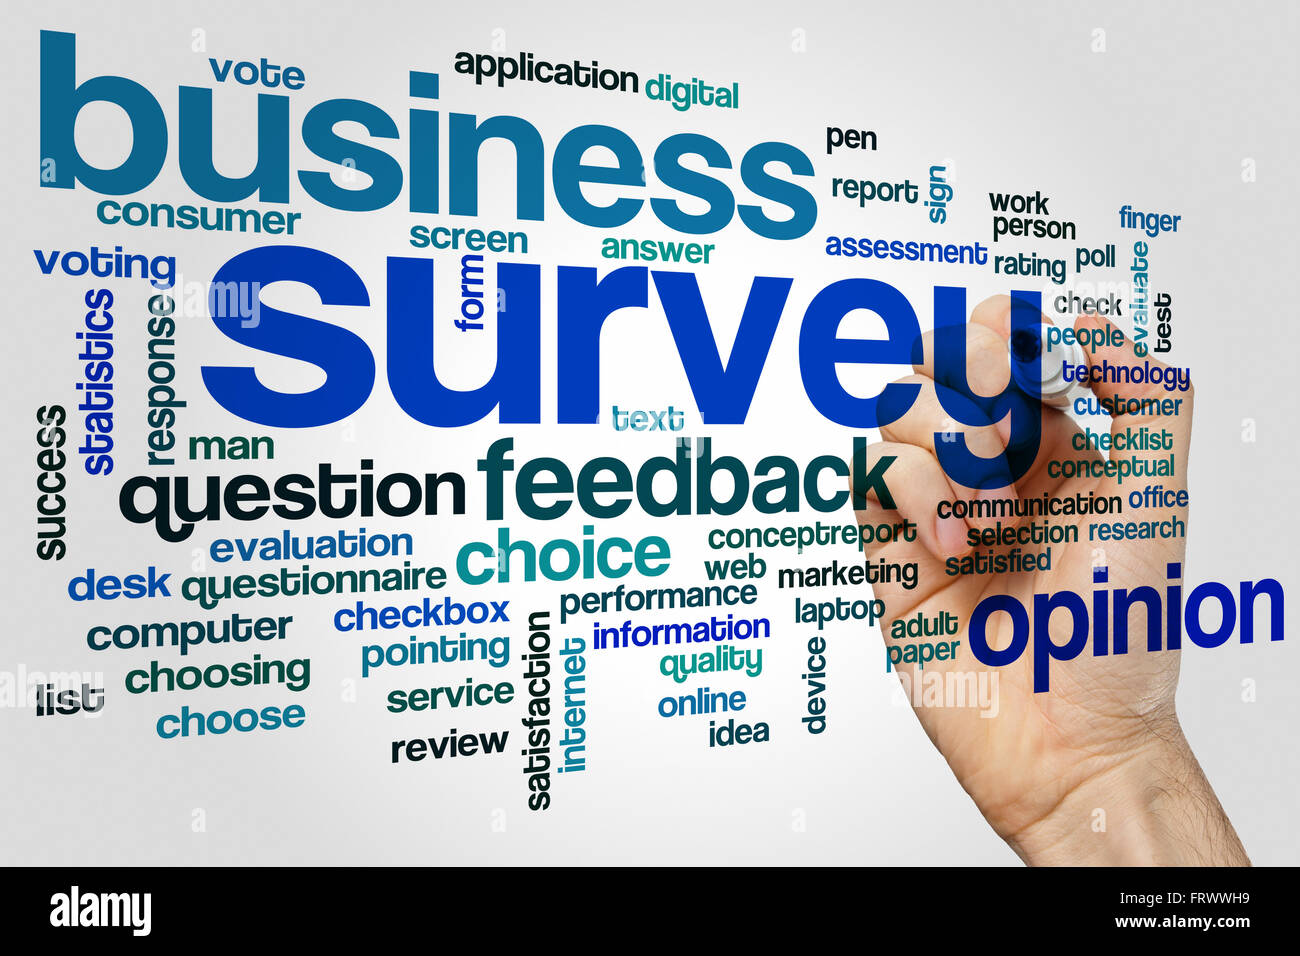 Rating vote. Word cloud Business. Work Report. Selection research,. Survey for Business.